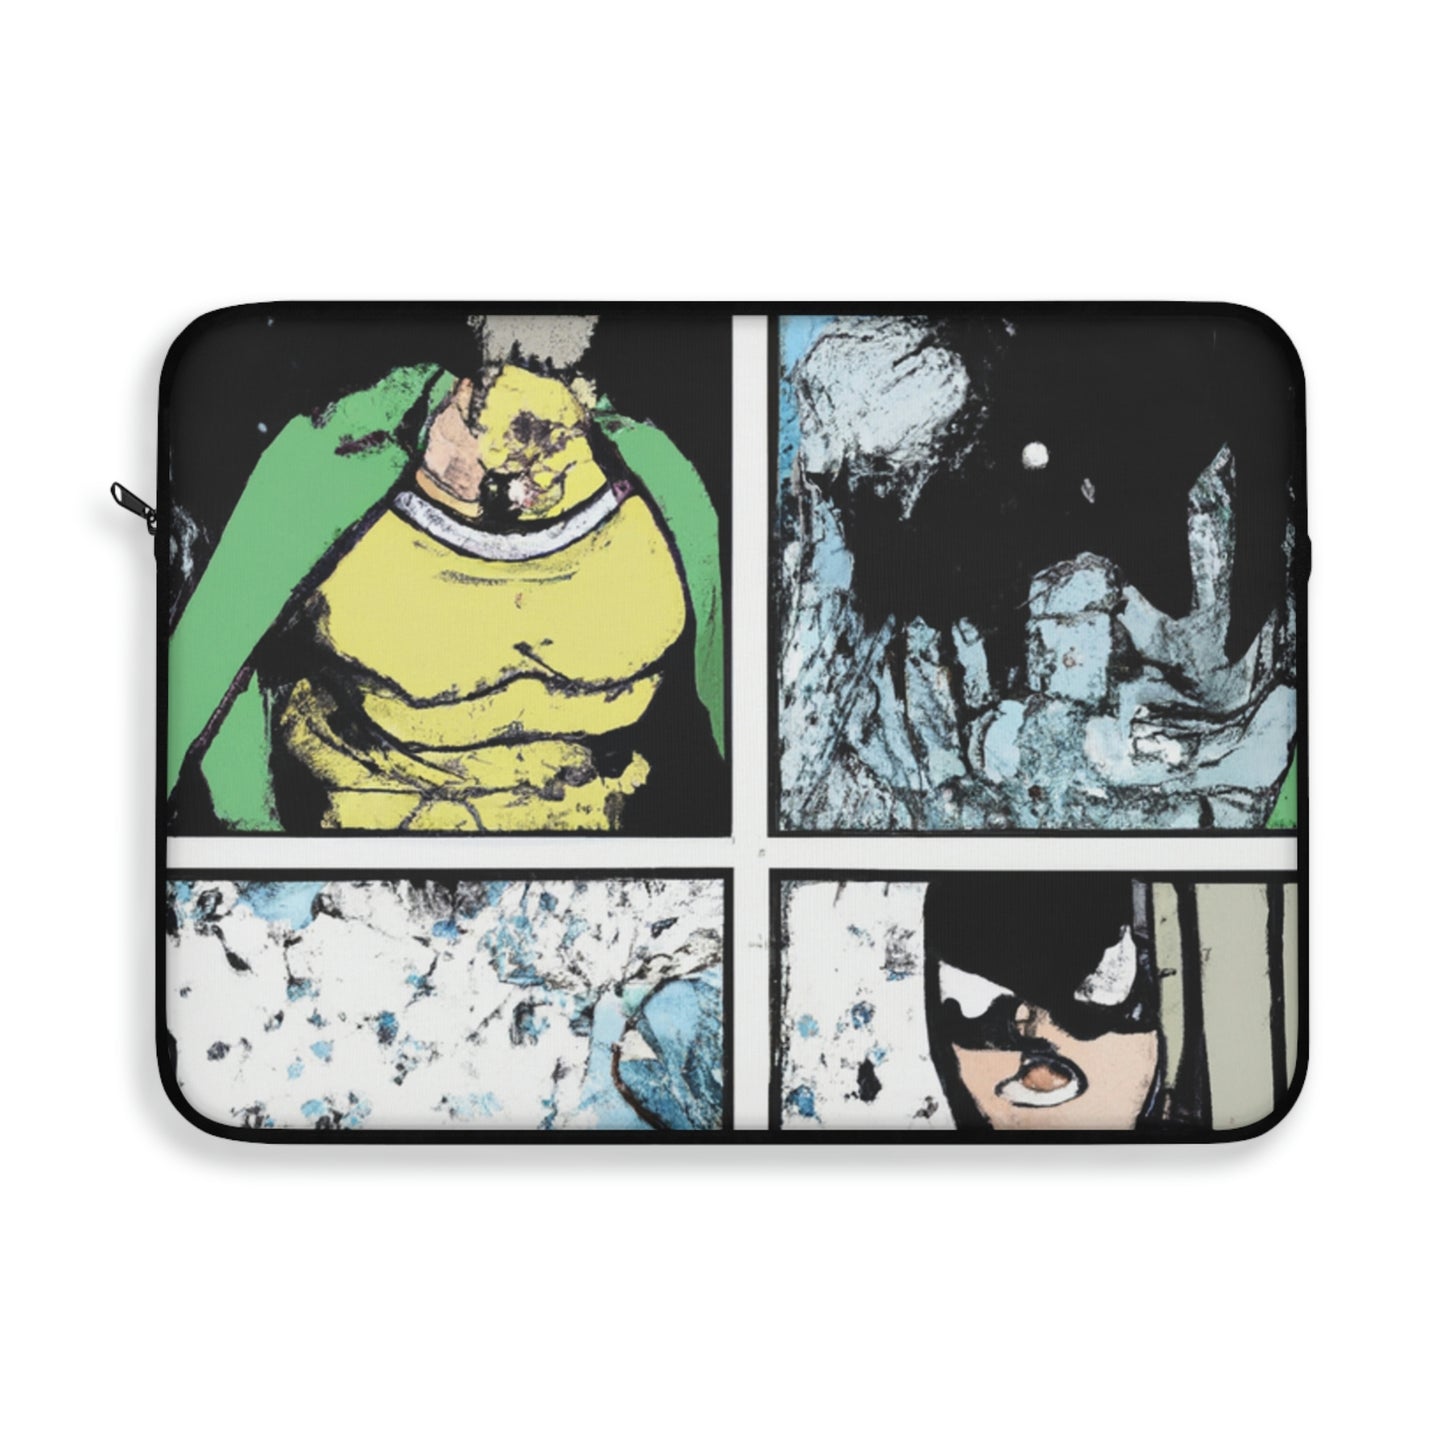 Biffy the Bopbot - Comic Book Collector Laptop Computer Sleeve Storage Case Bag